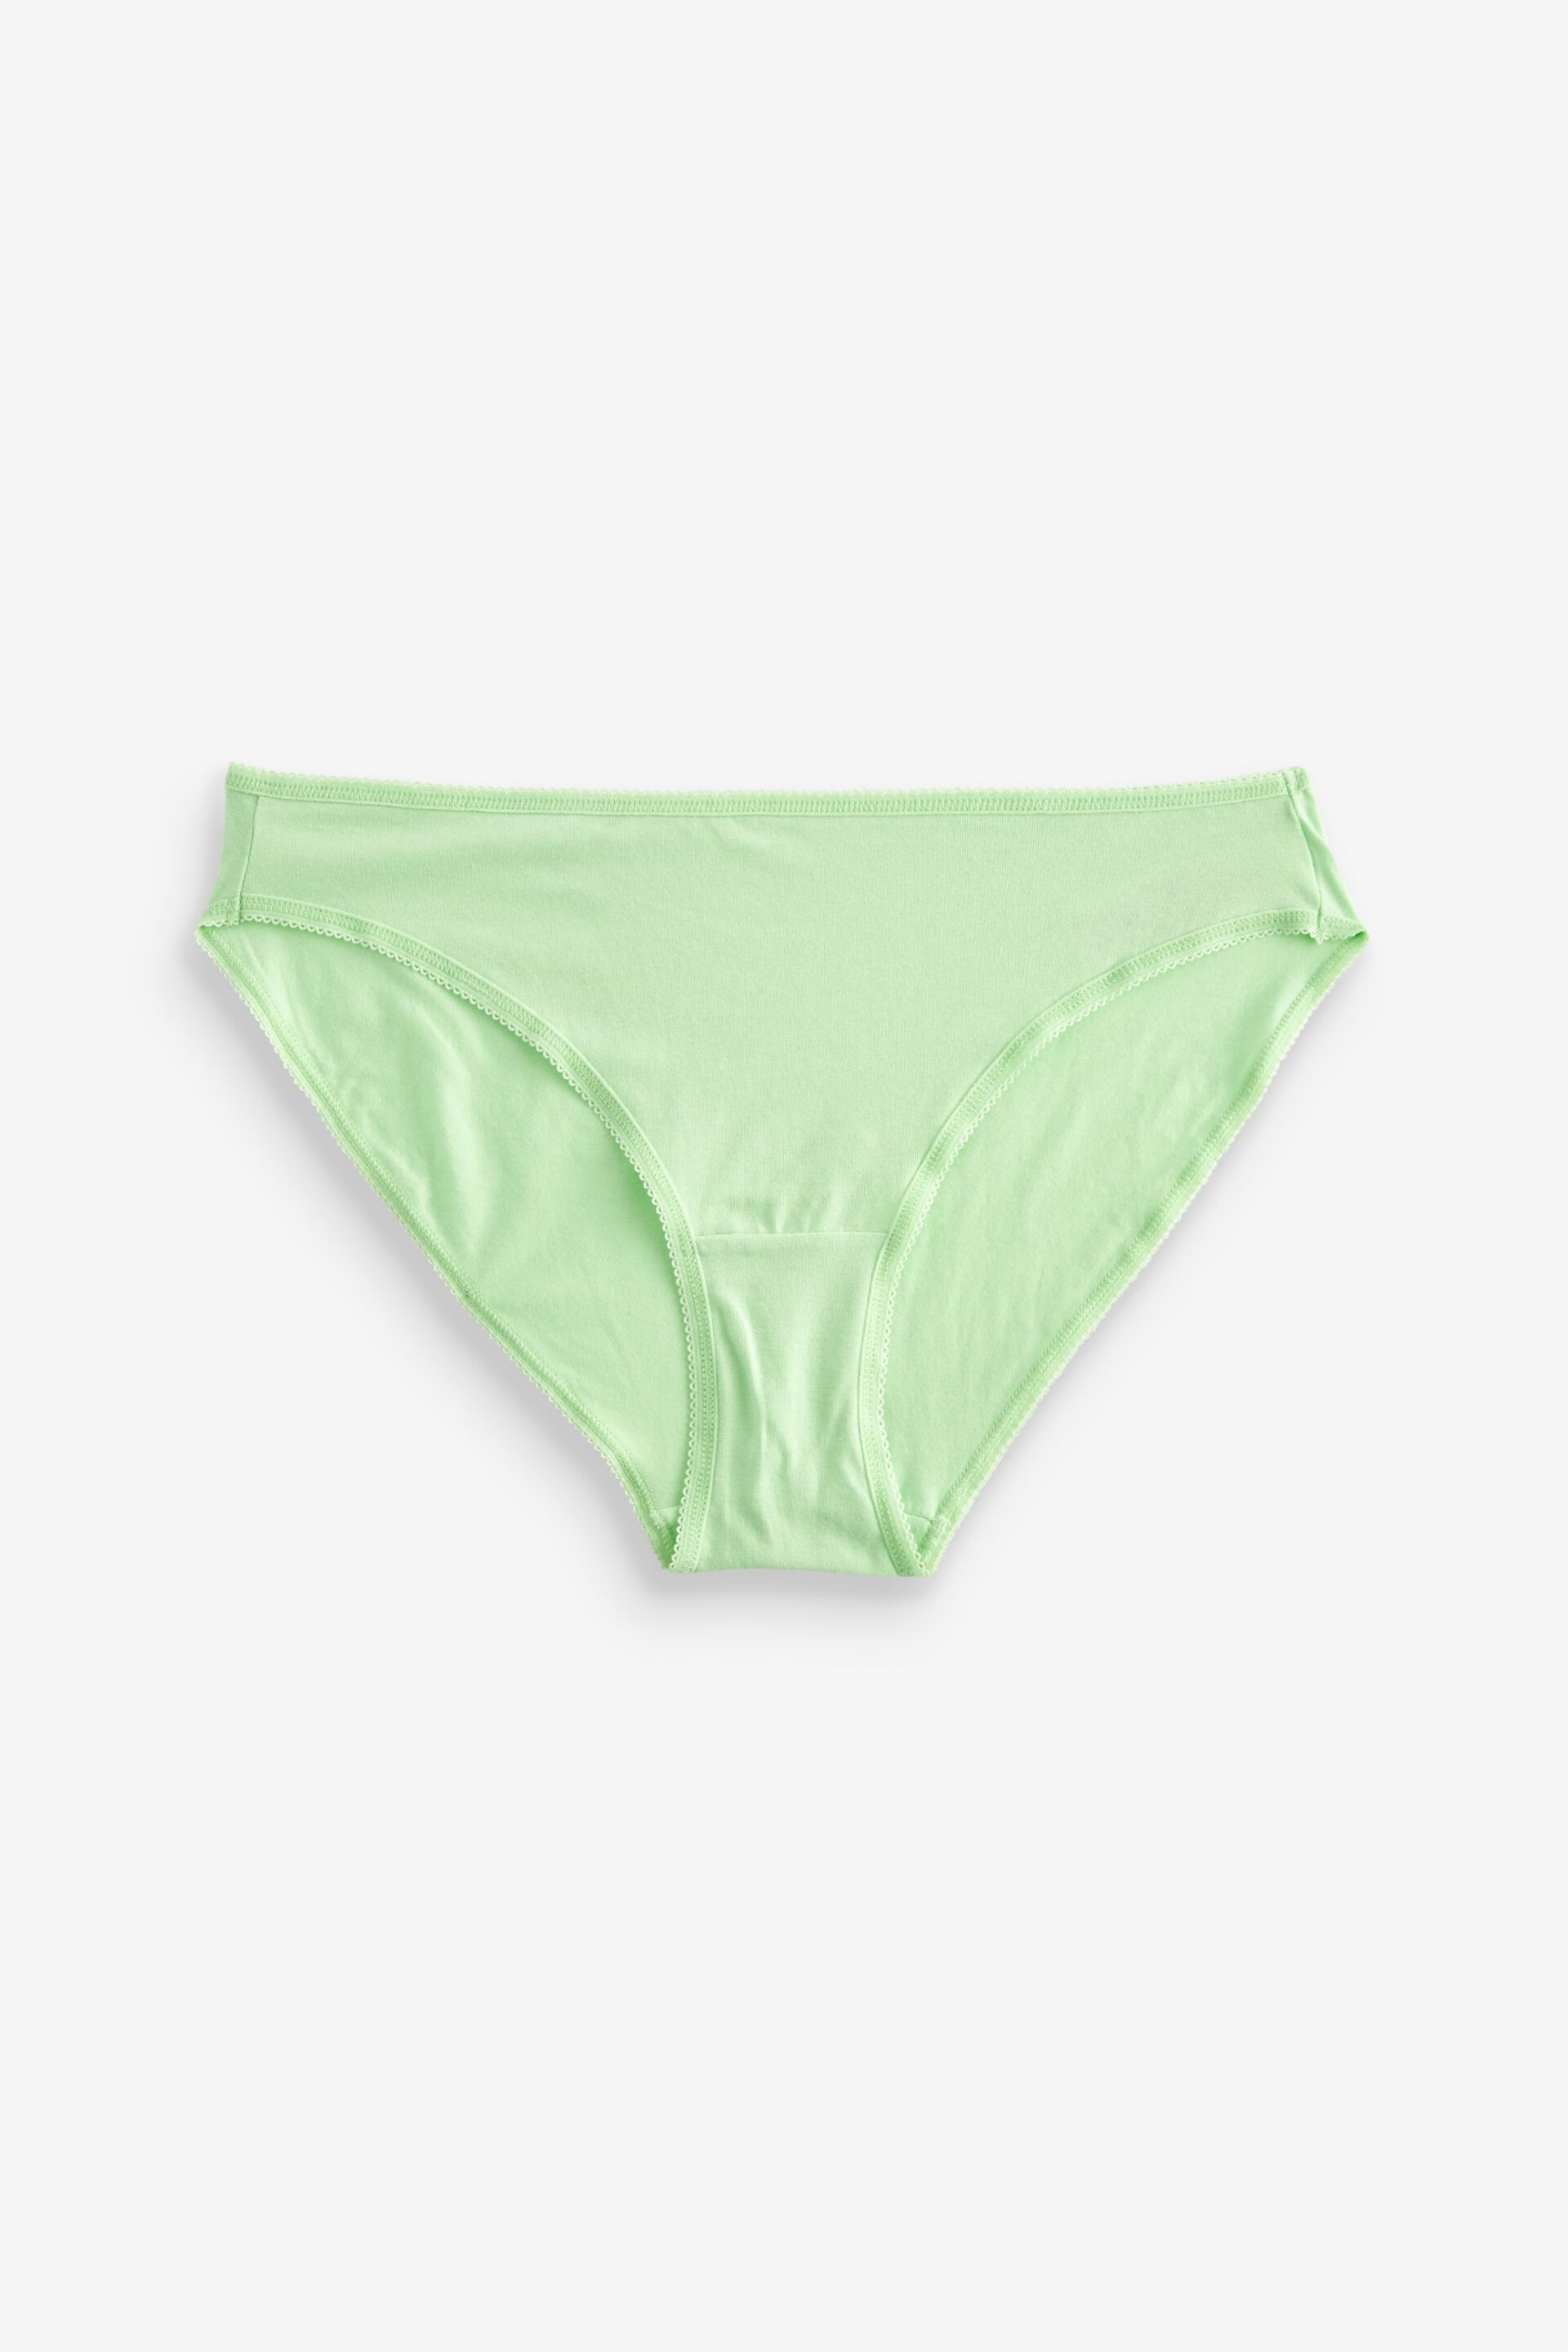 Pastel Colours High Leg Cotton Rich Knickers 6 Pack - Image 5 of 10